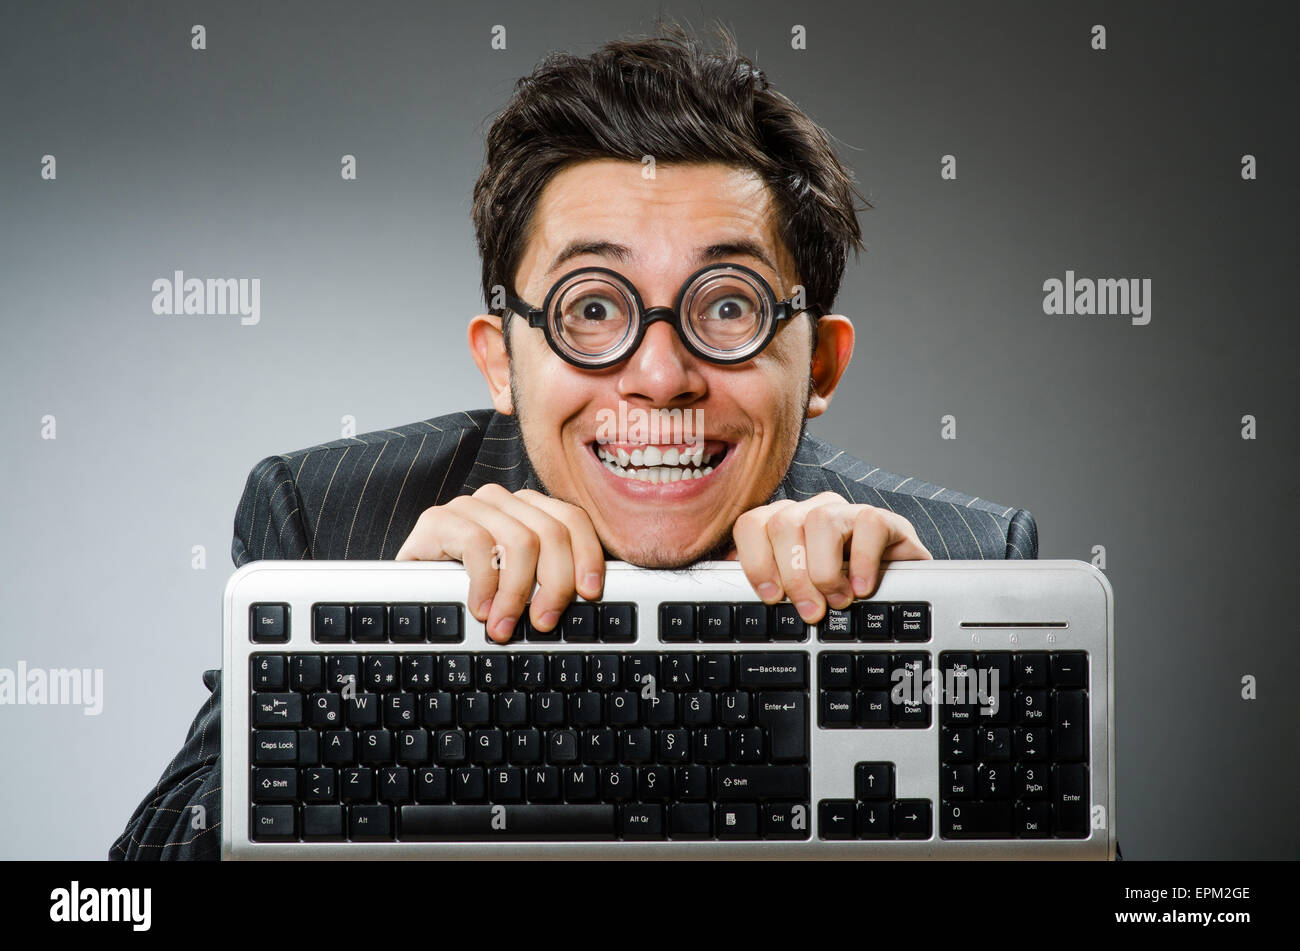 Computer geek with computer keyboard Stock Photo